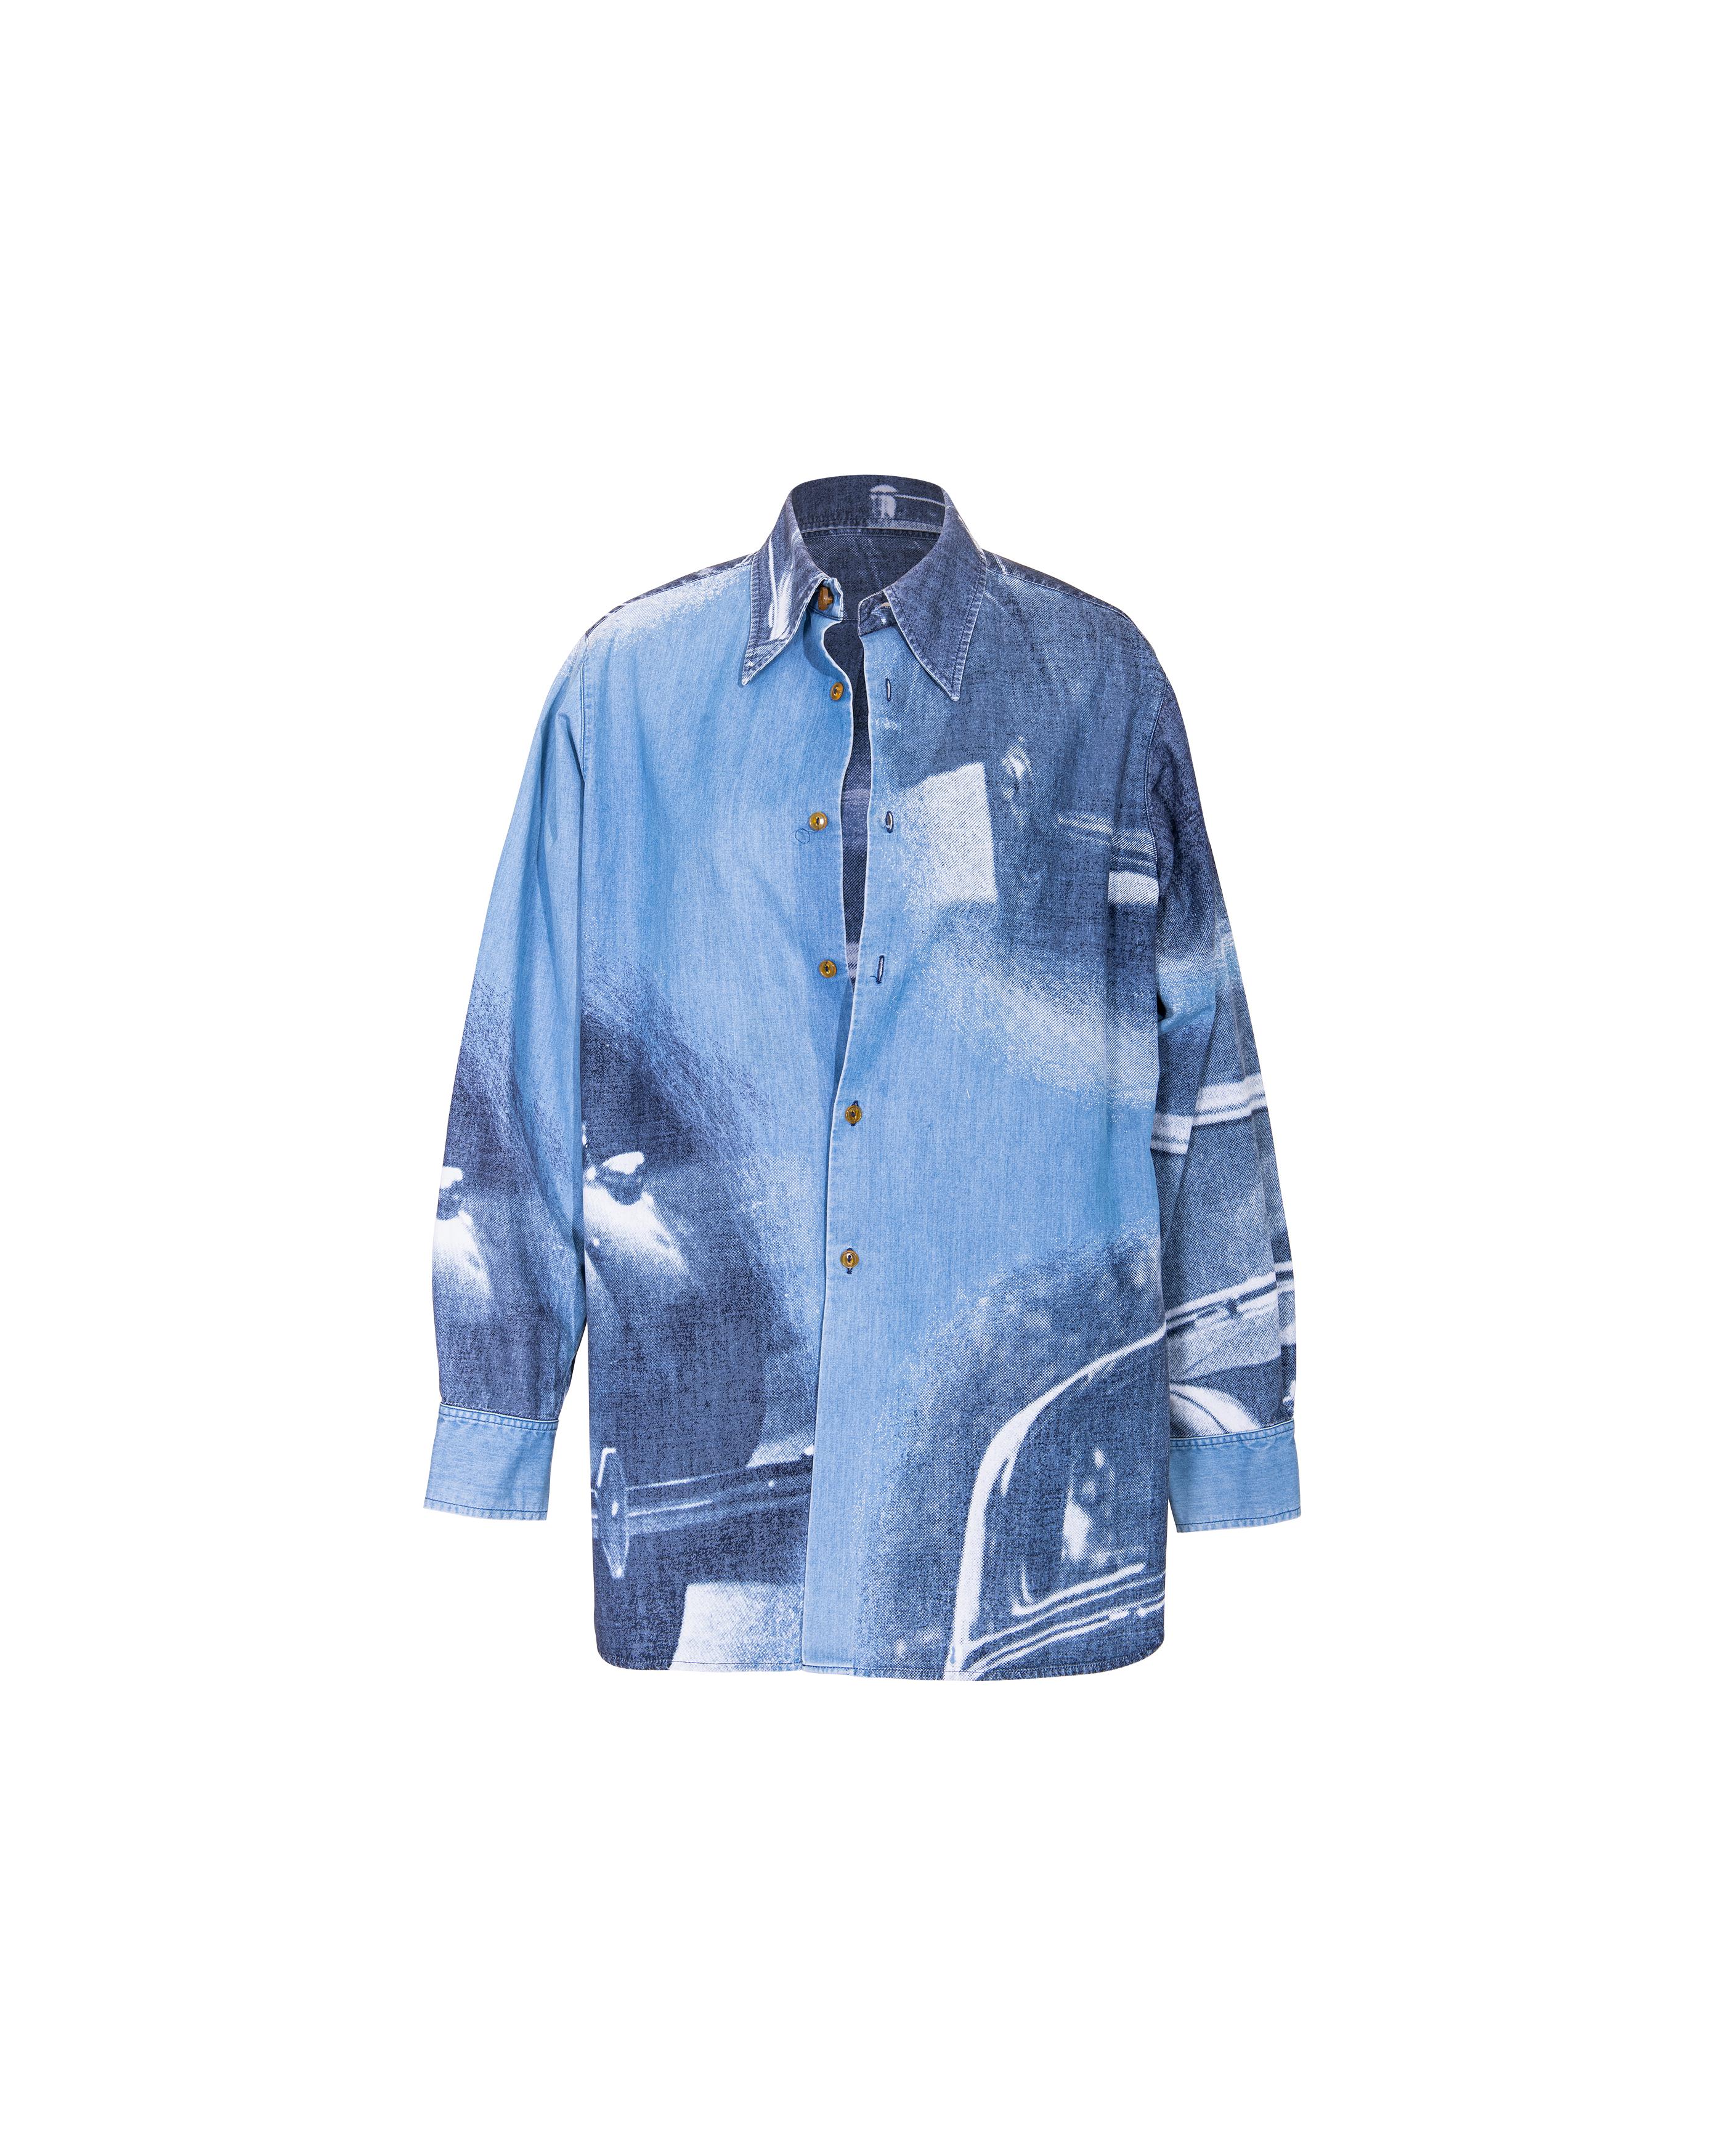 A/W 1992 Vivienne Westwood 'Always on Camera' Collection Rolls Royce Button-Up 1